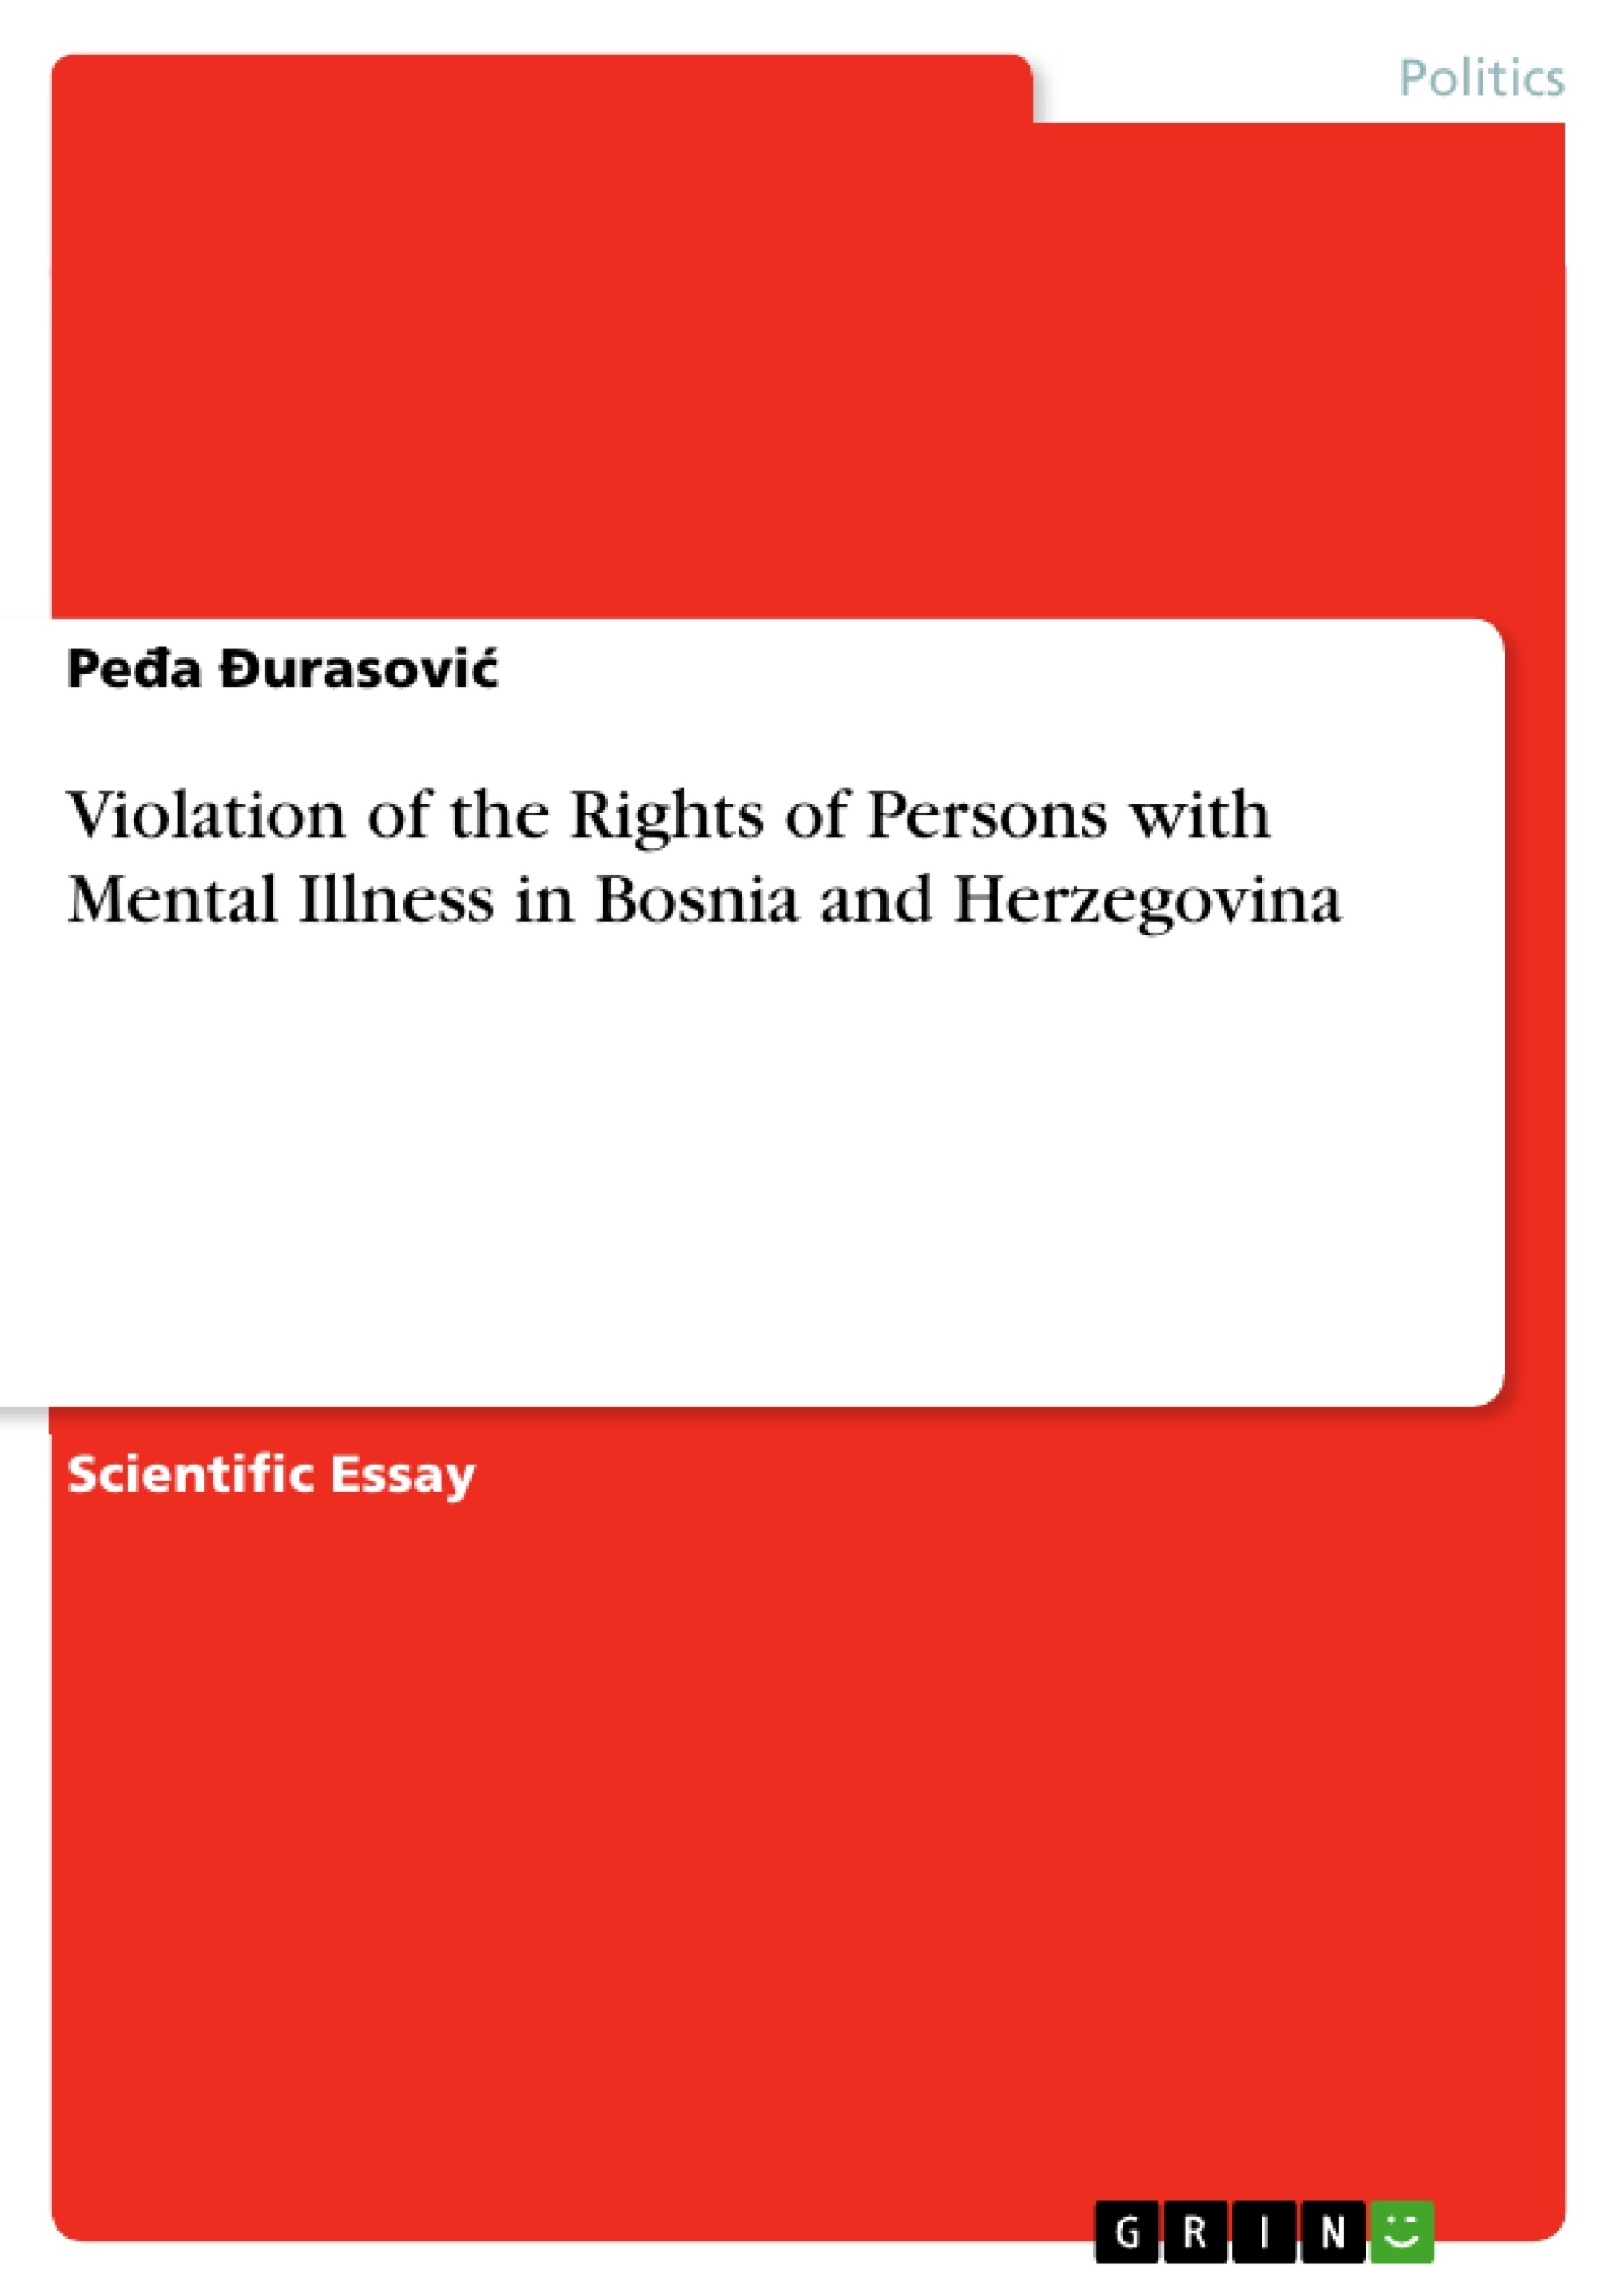 Título: Violation of the Rights of Persons with Mental Illness in Bosnia and Herzegovina